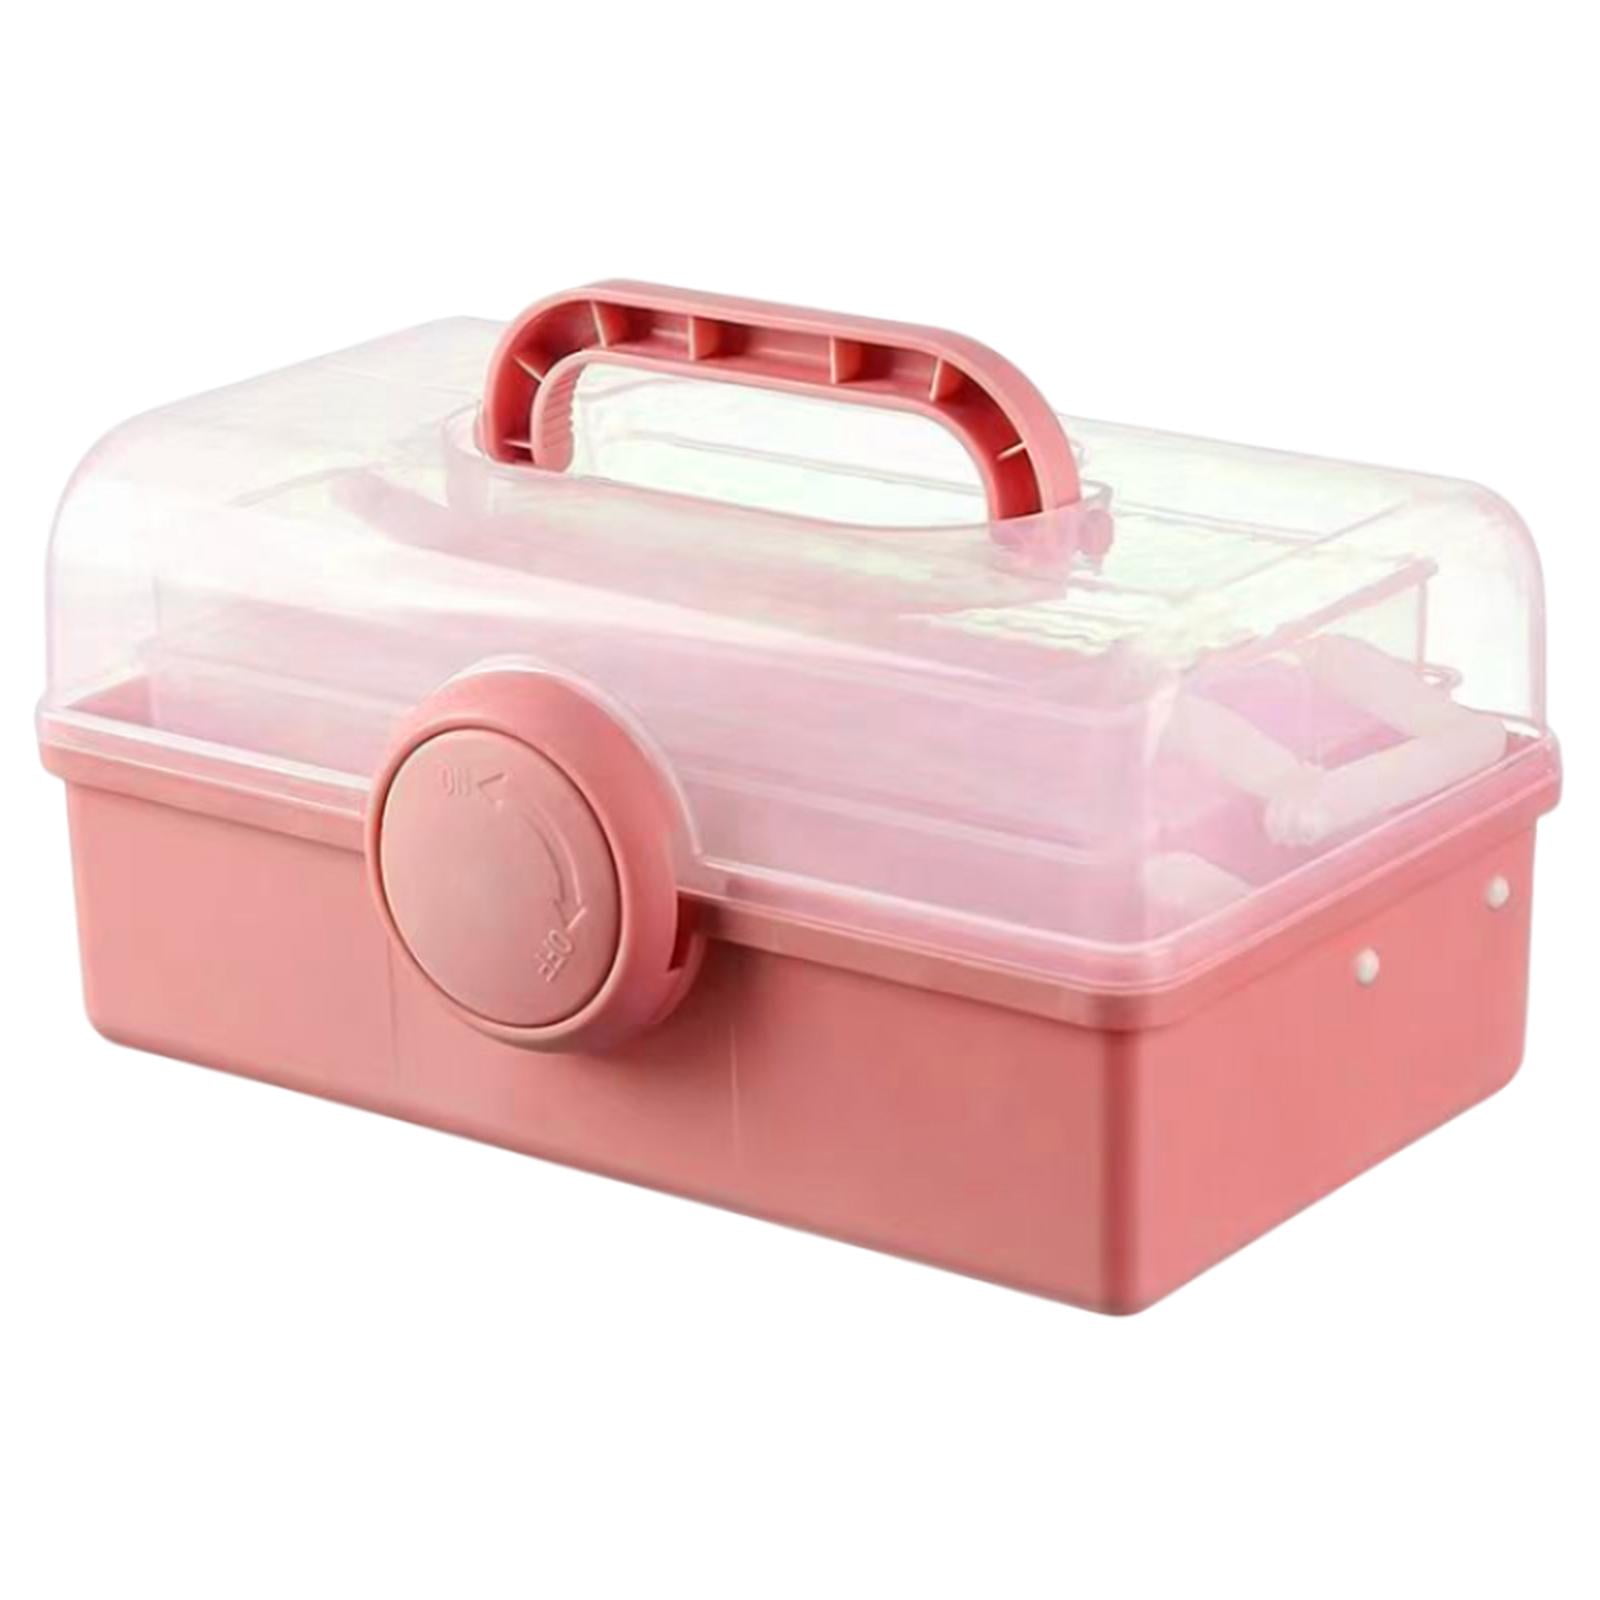 Craft Art Box Pink Tackle Box for Girls Art Bin Storage Box with Handle  Portable Storage Container Small Craft Box First Aid Box Sewing Box for  Kids